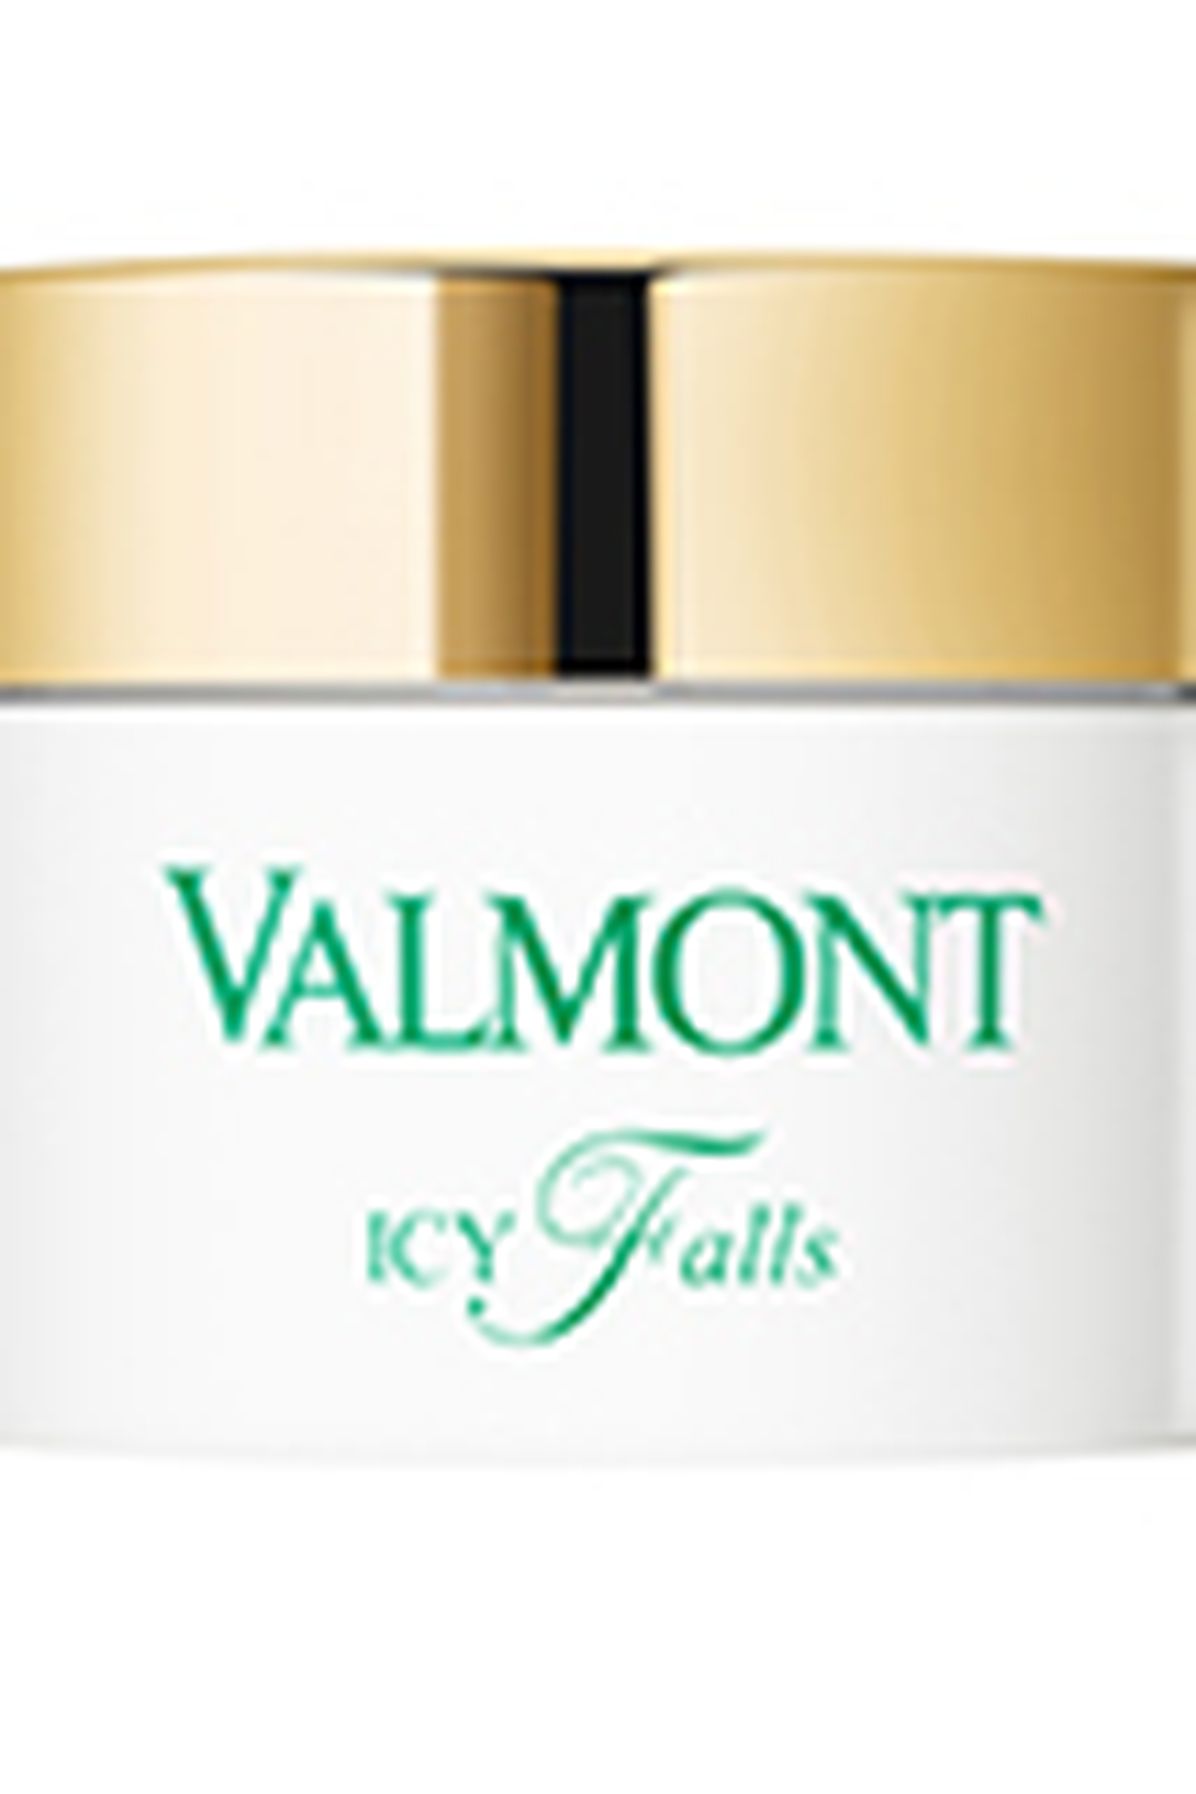 Valmont ICY FALLS  200 ml